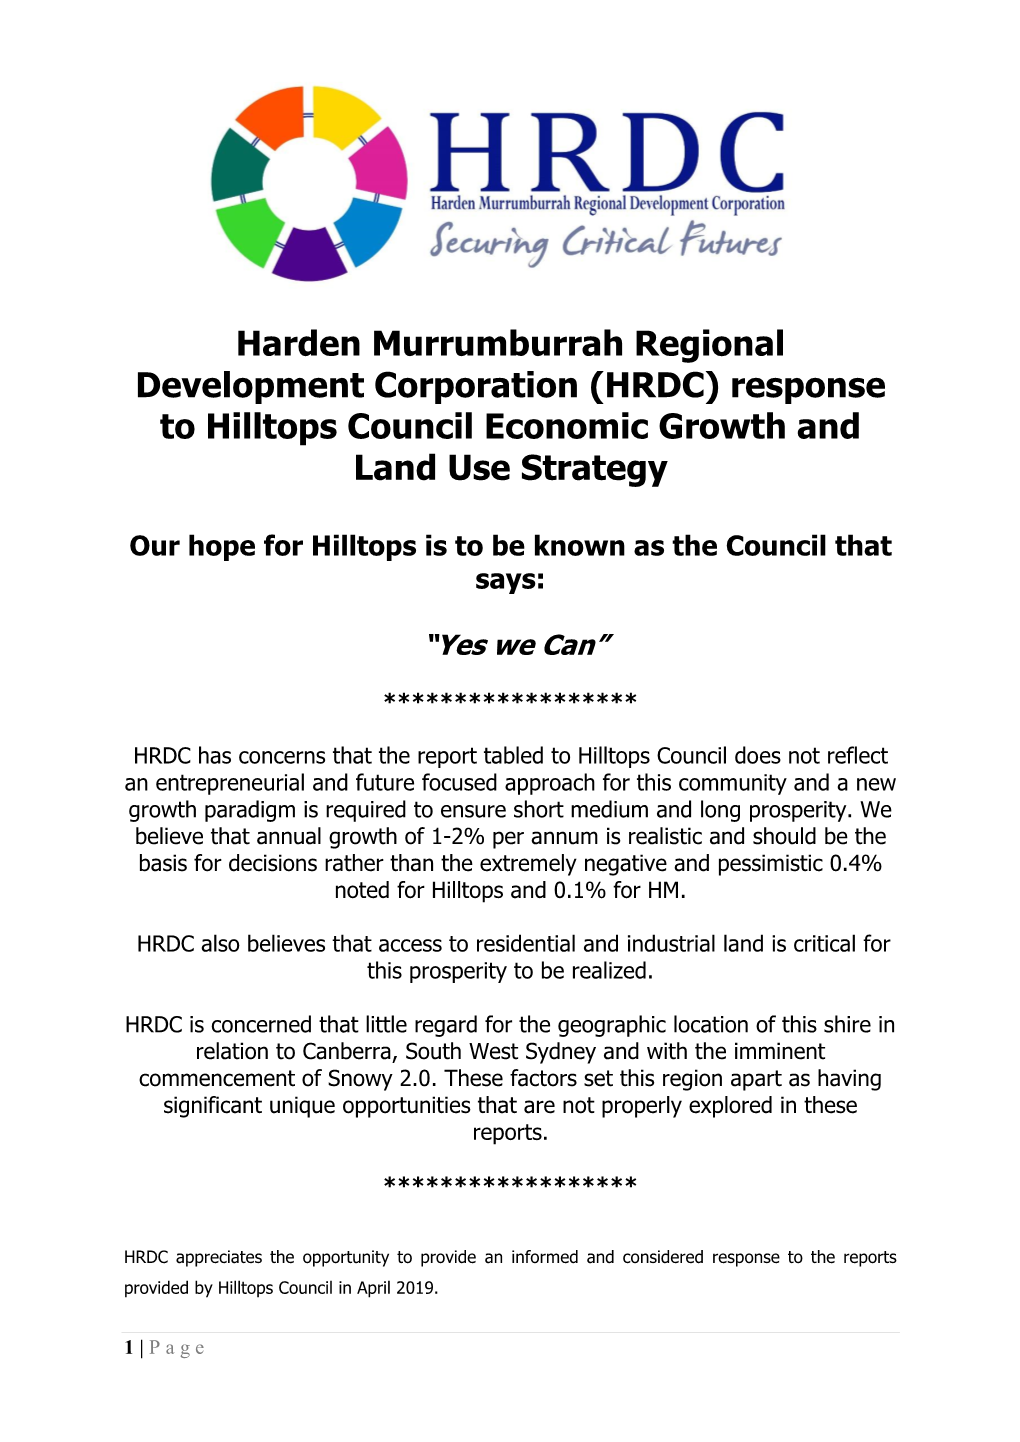 Response to Hilltops Council Economic Growth and Land Use Strategy